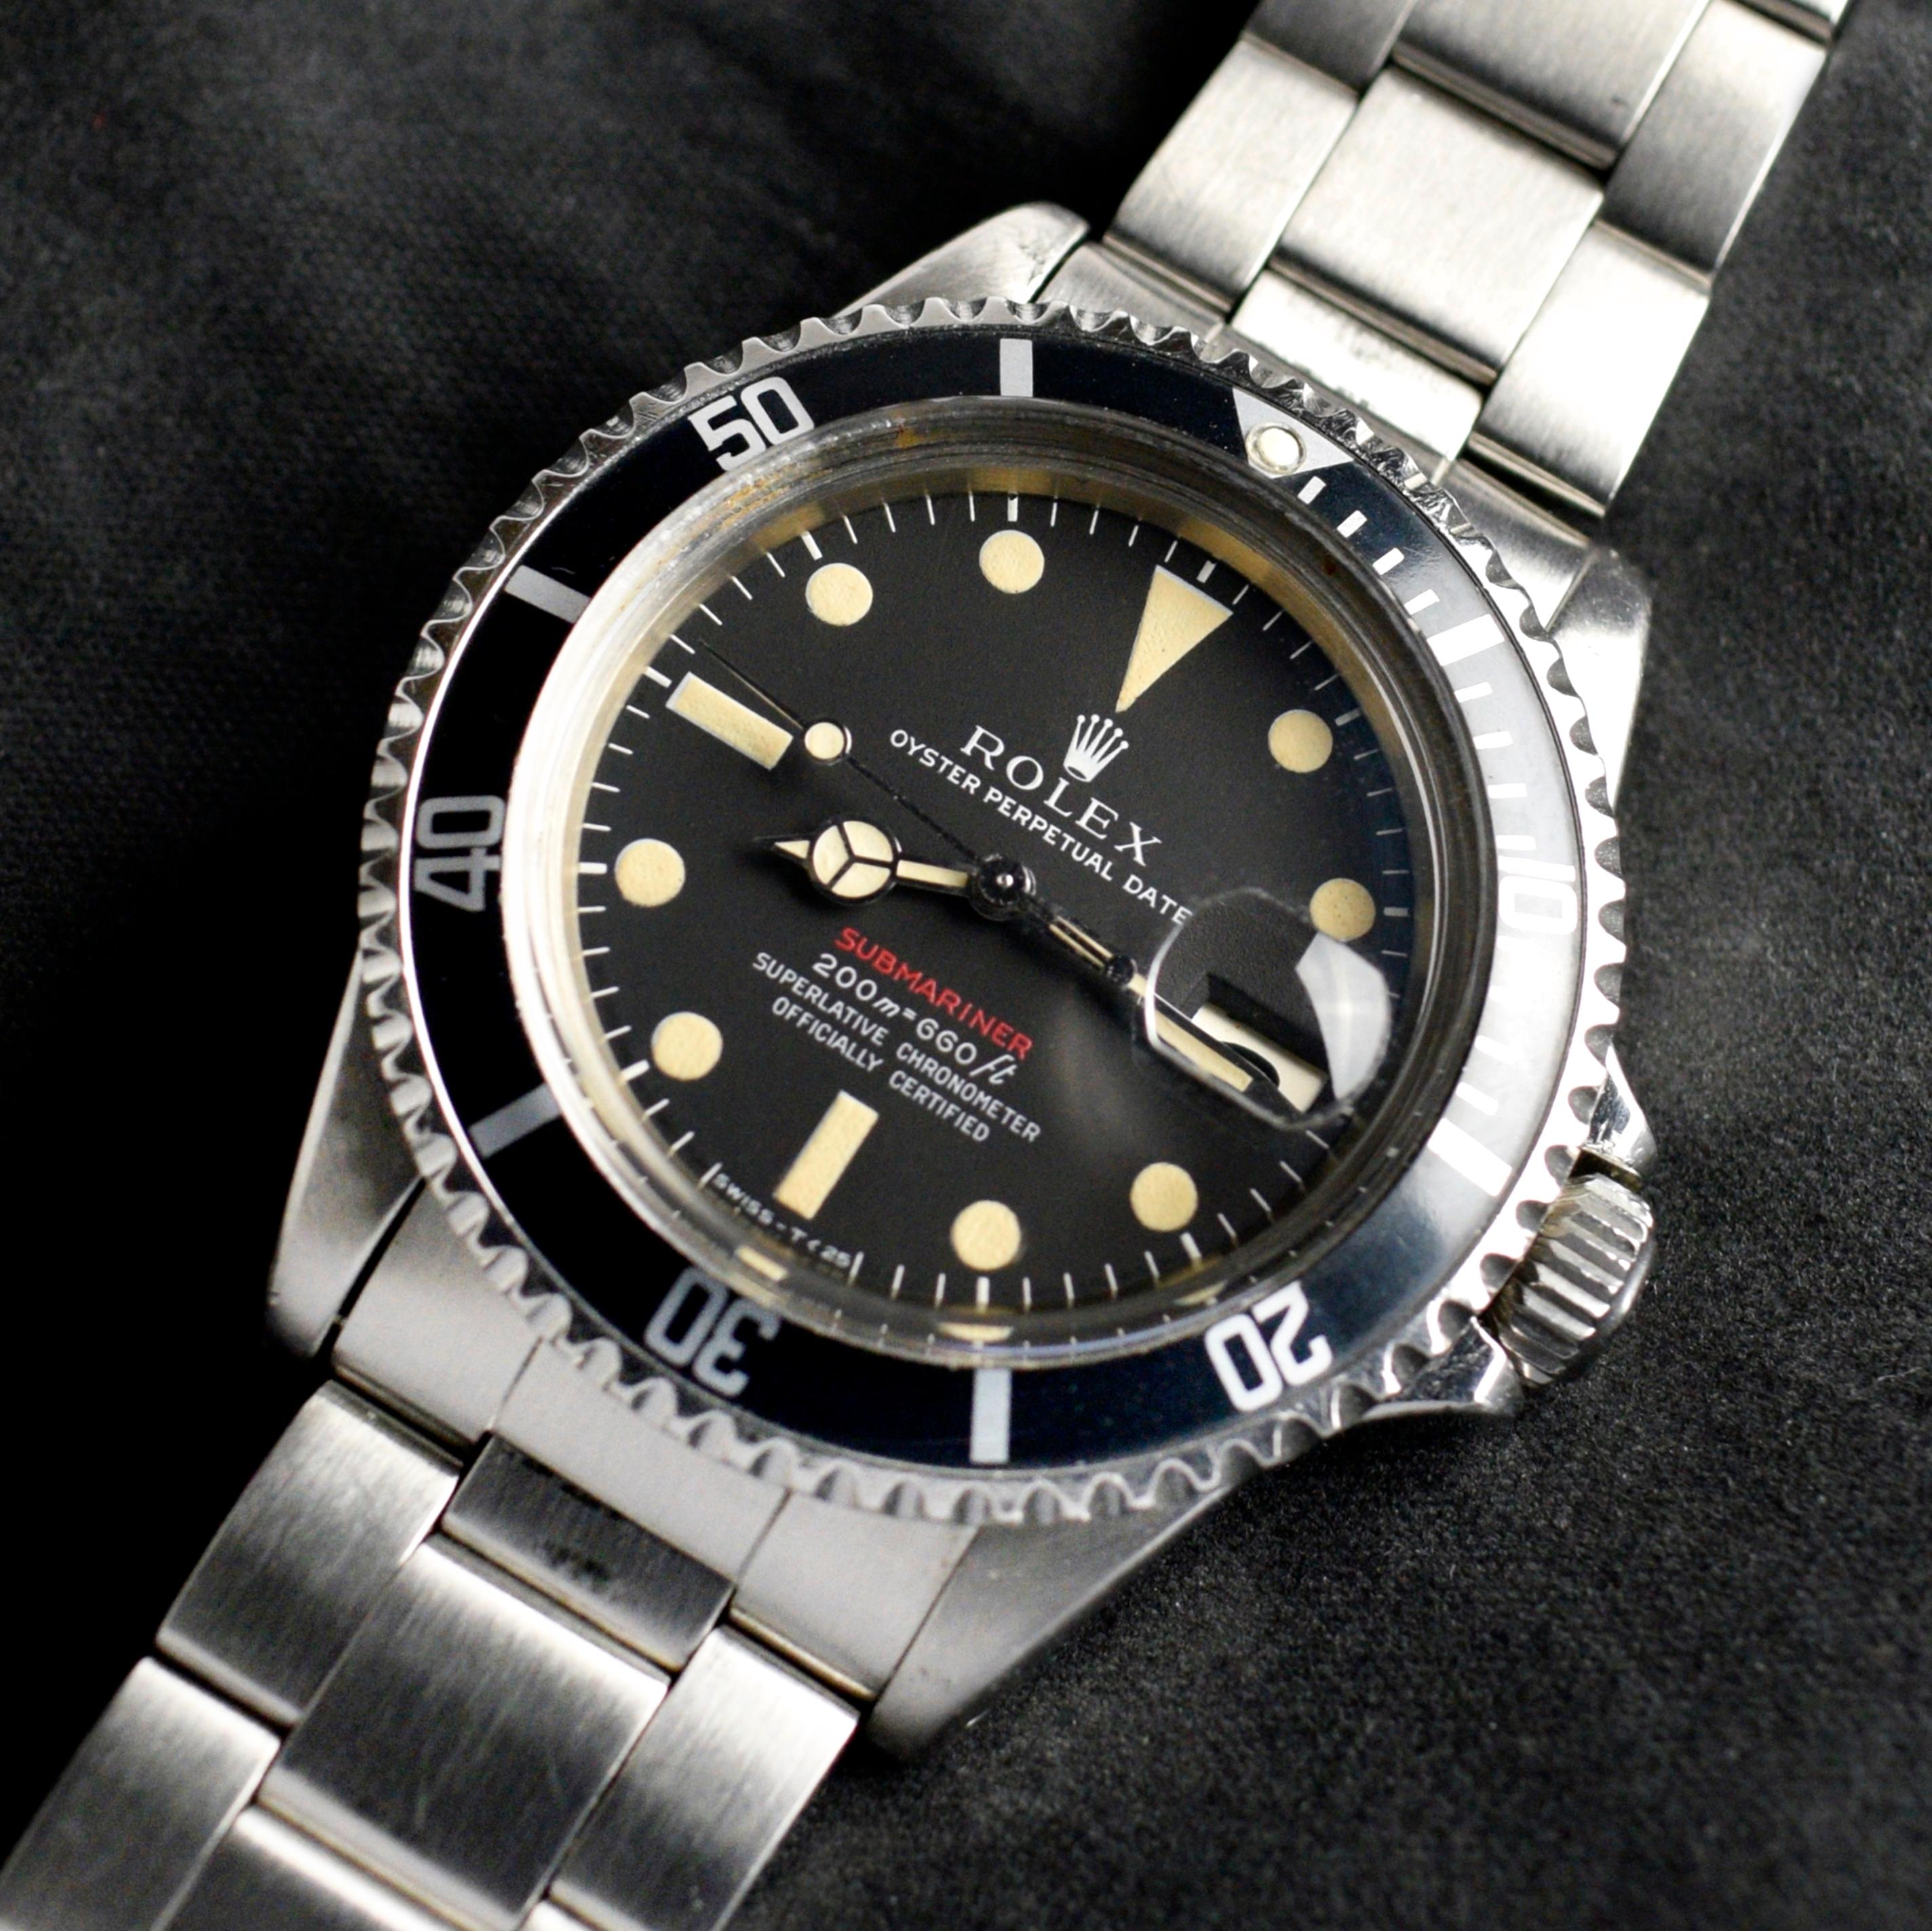 Brand: Vintage Rolex
Model: 1680
Year: 1969
Serial number: 22xxxxx
Reference: C03596

Case: Show sign of wear with very slight light polish from previous; inner case back stamped 1680 III 69

Dial: Excellent Condition Tritium Meter First Single Red